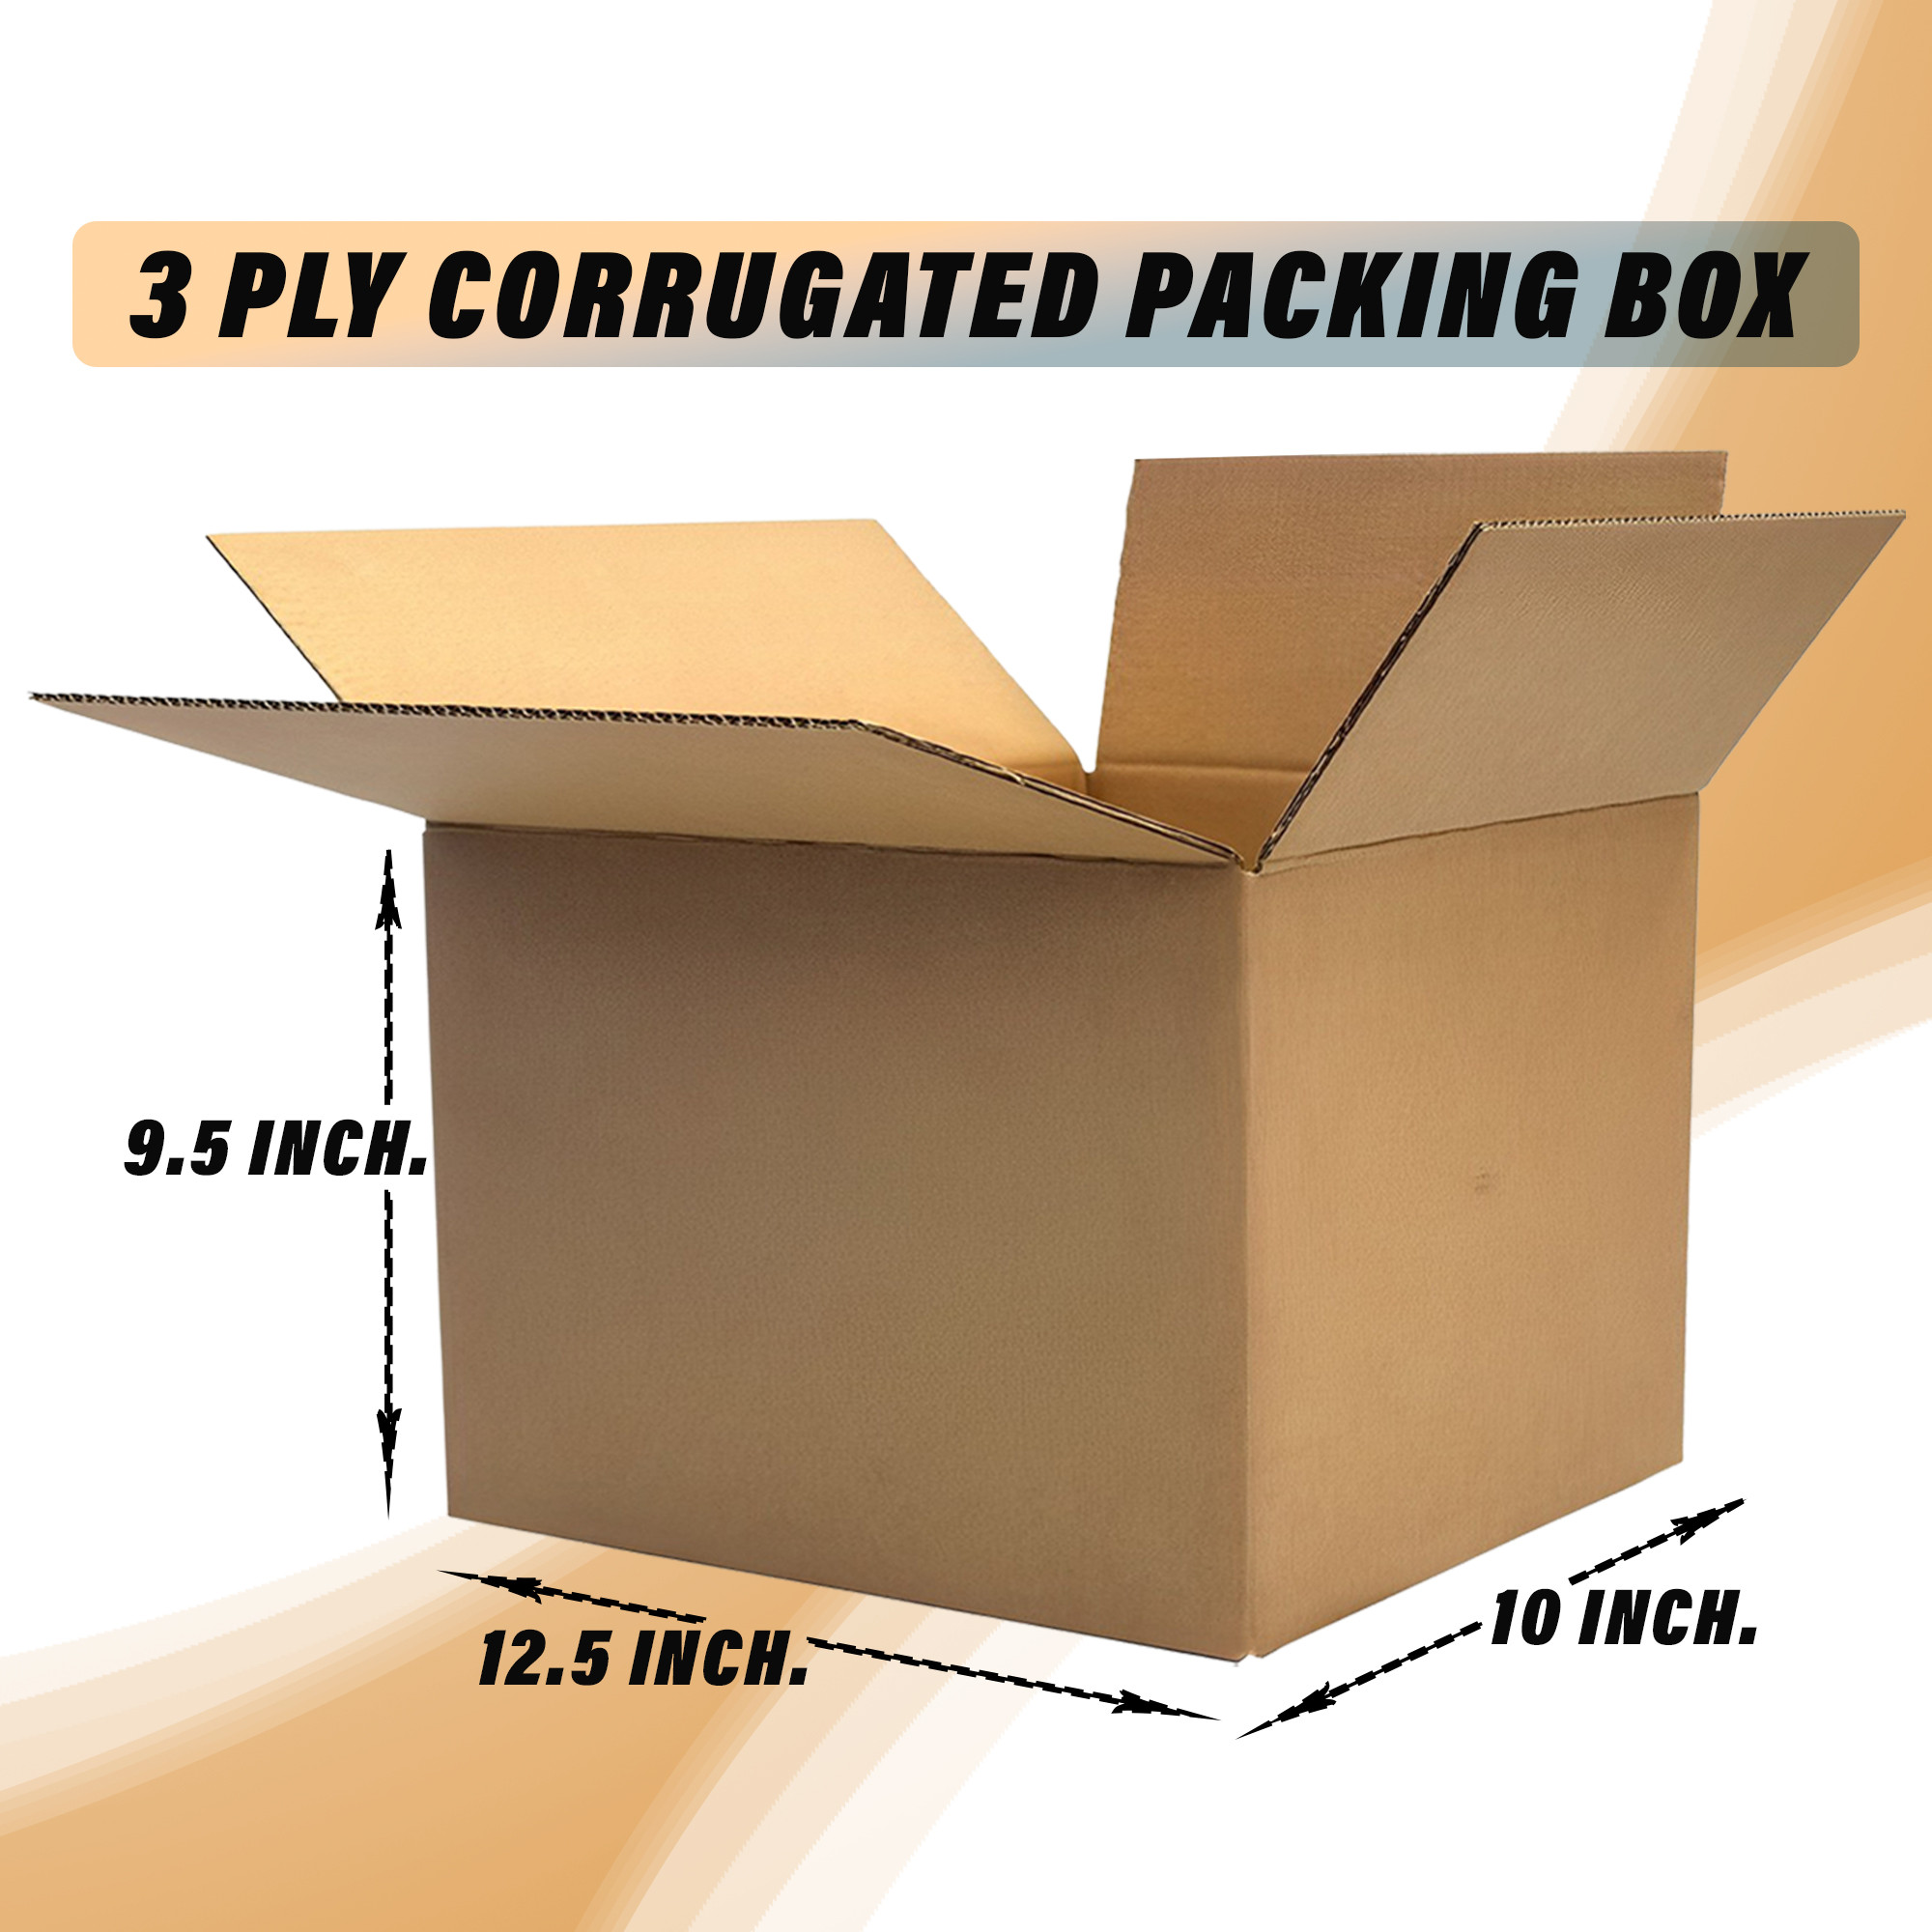 Kuber Industries Corrugated Box | 3 Ply Corrugated Packing Box | Corrugated for Shipping | Corrugated for Courier & Goods Transportation | L 12.5 x W 10 x H 9.5 Inch |Brown